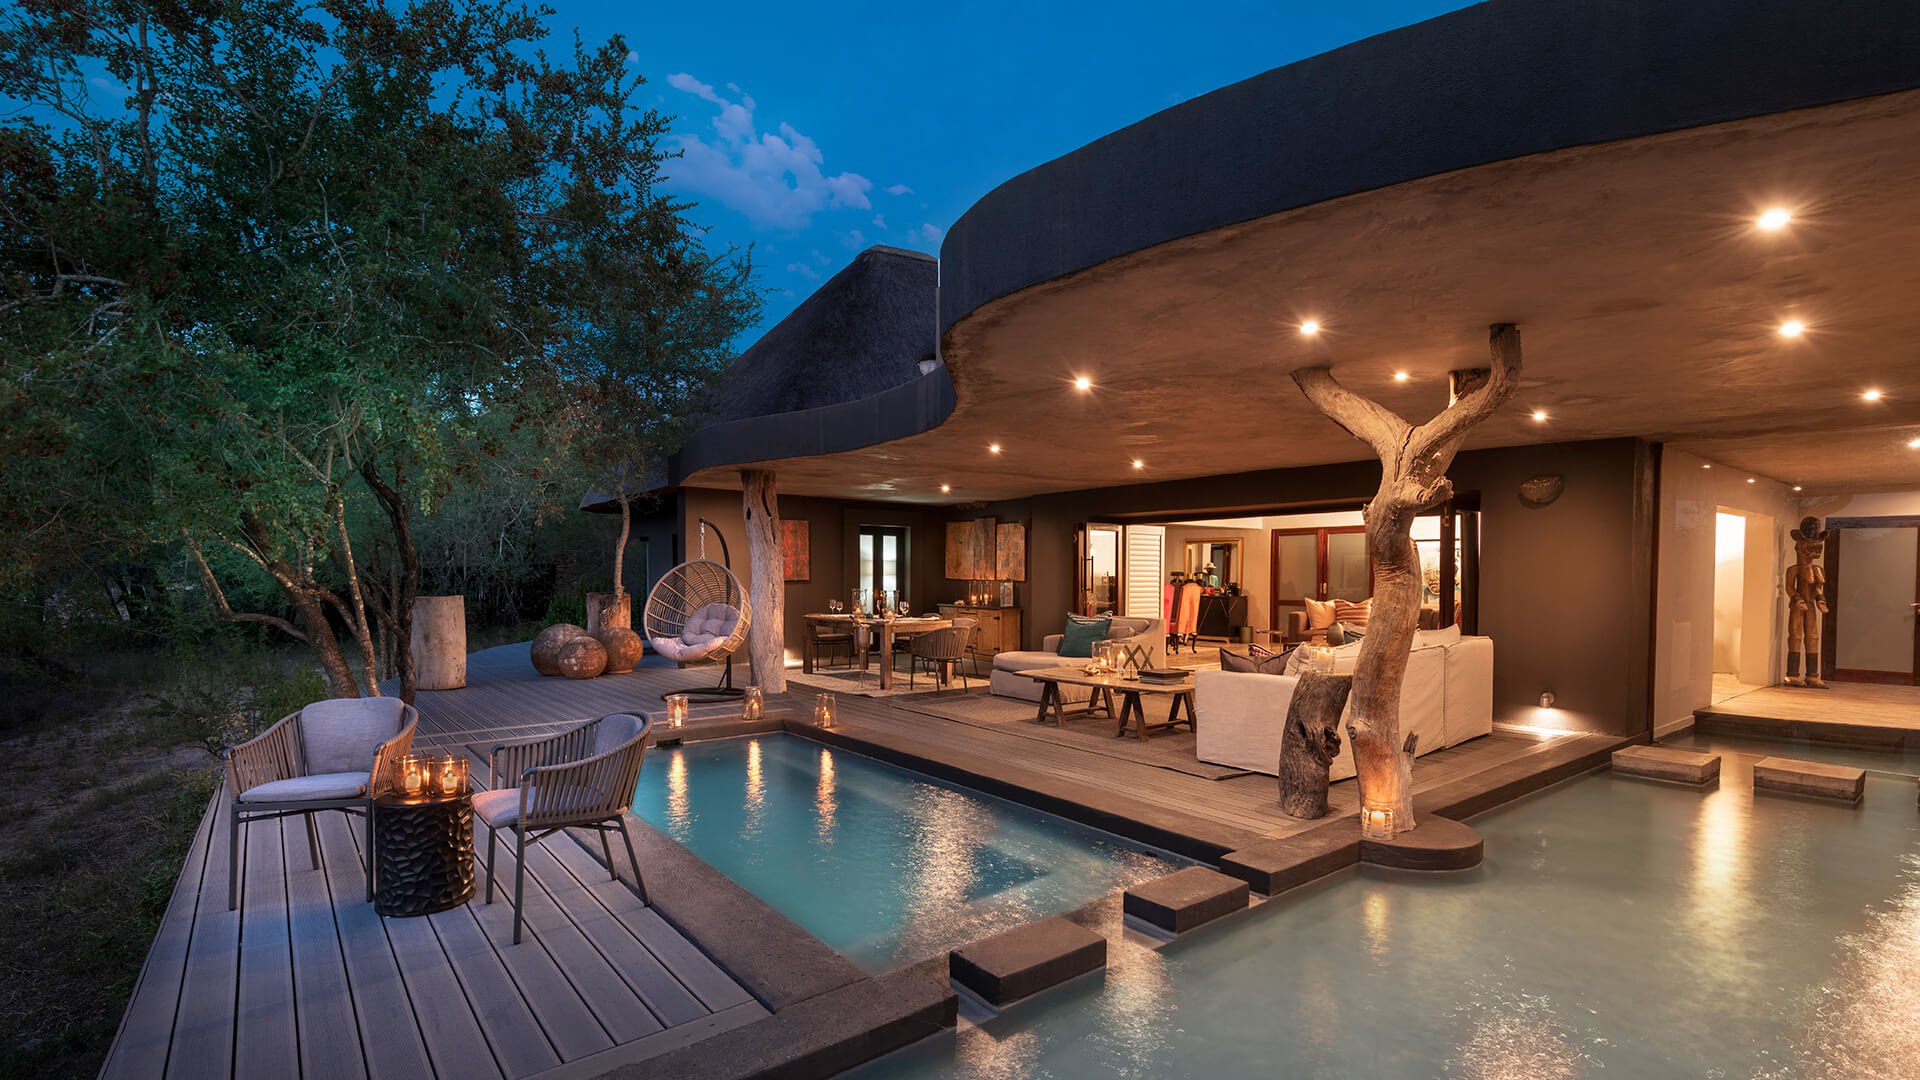 An outdoor patio with a pool at a modern house in the evening, featuring seating areas, a tree integrated into the structure, and warm lighting at Chitwa Chitwa a lodge perfect for a safari elopement